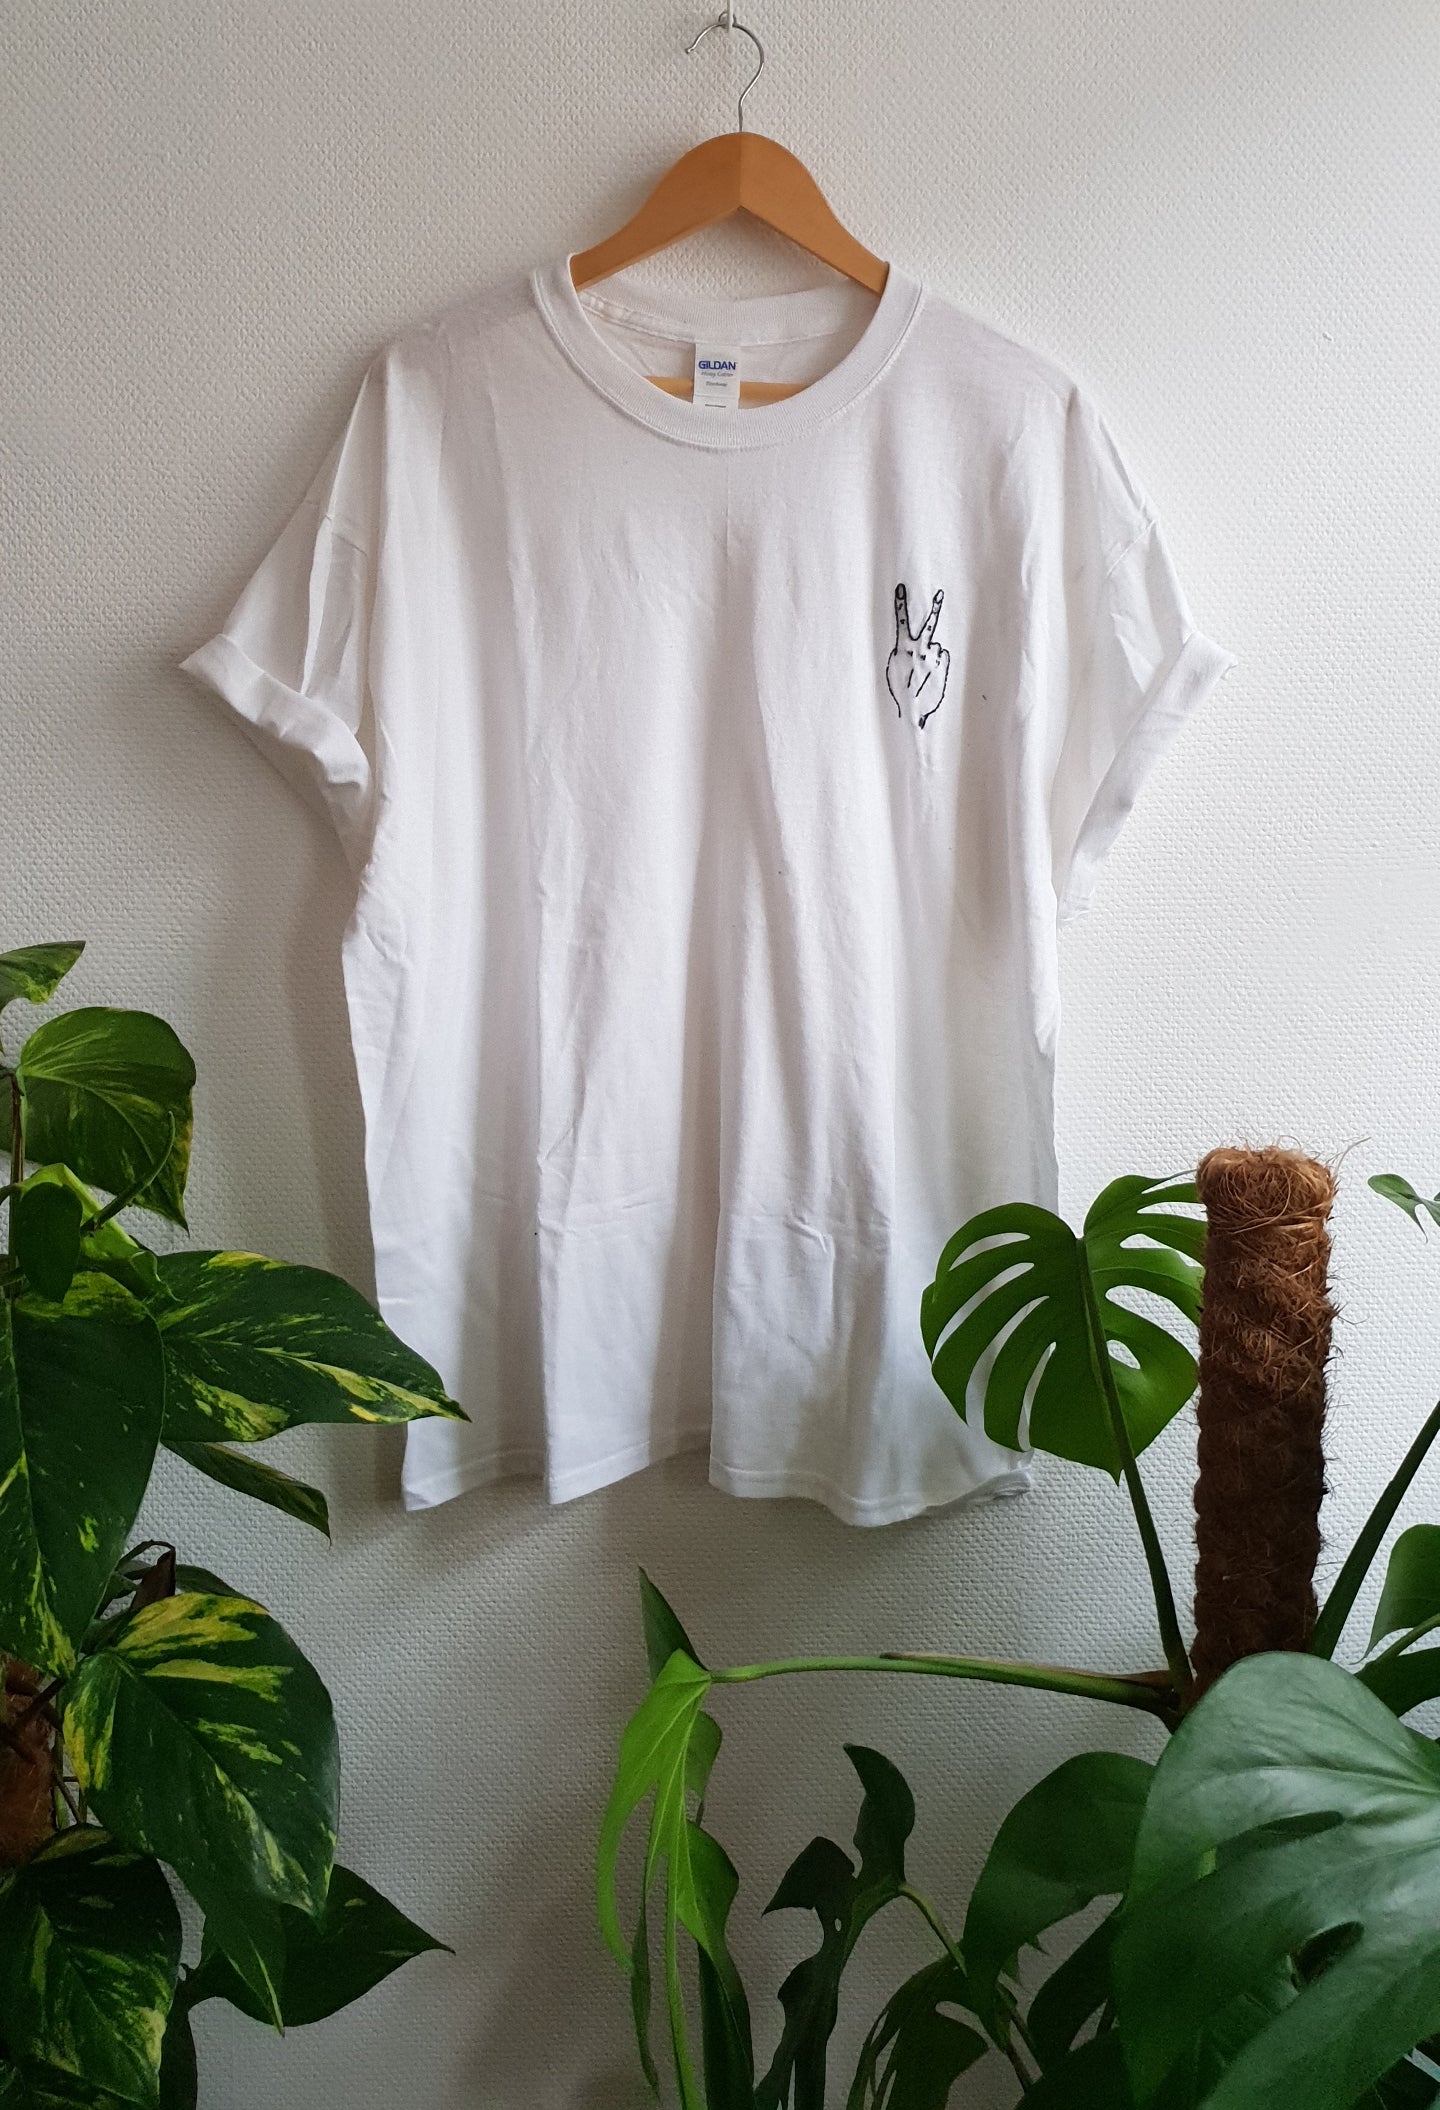 Hand Embroidered Peace Hand Shirt -  Spacy Shirts